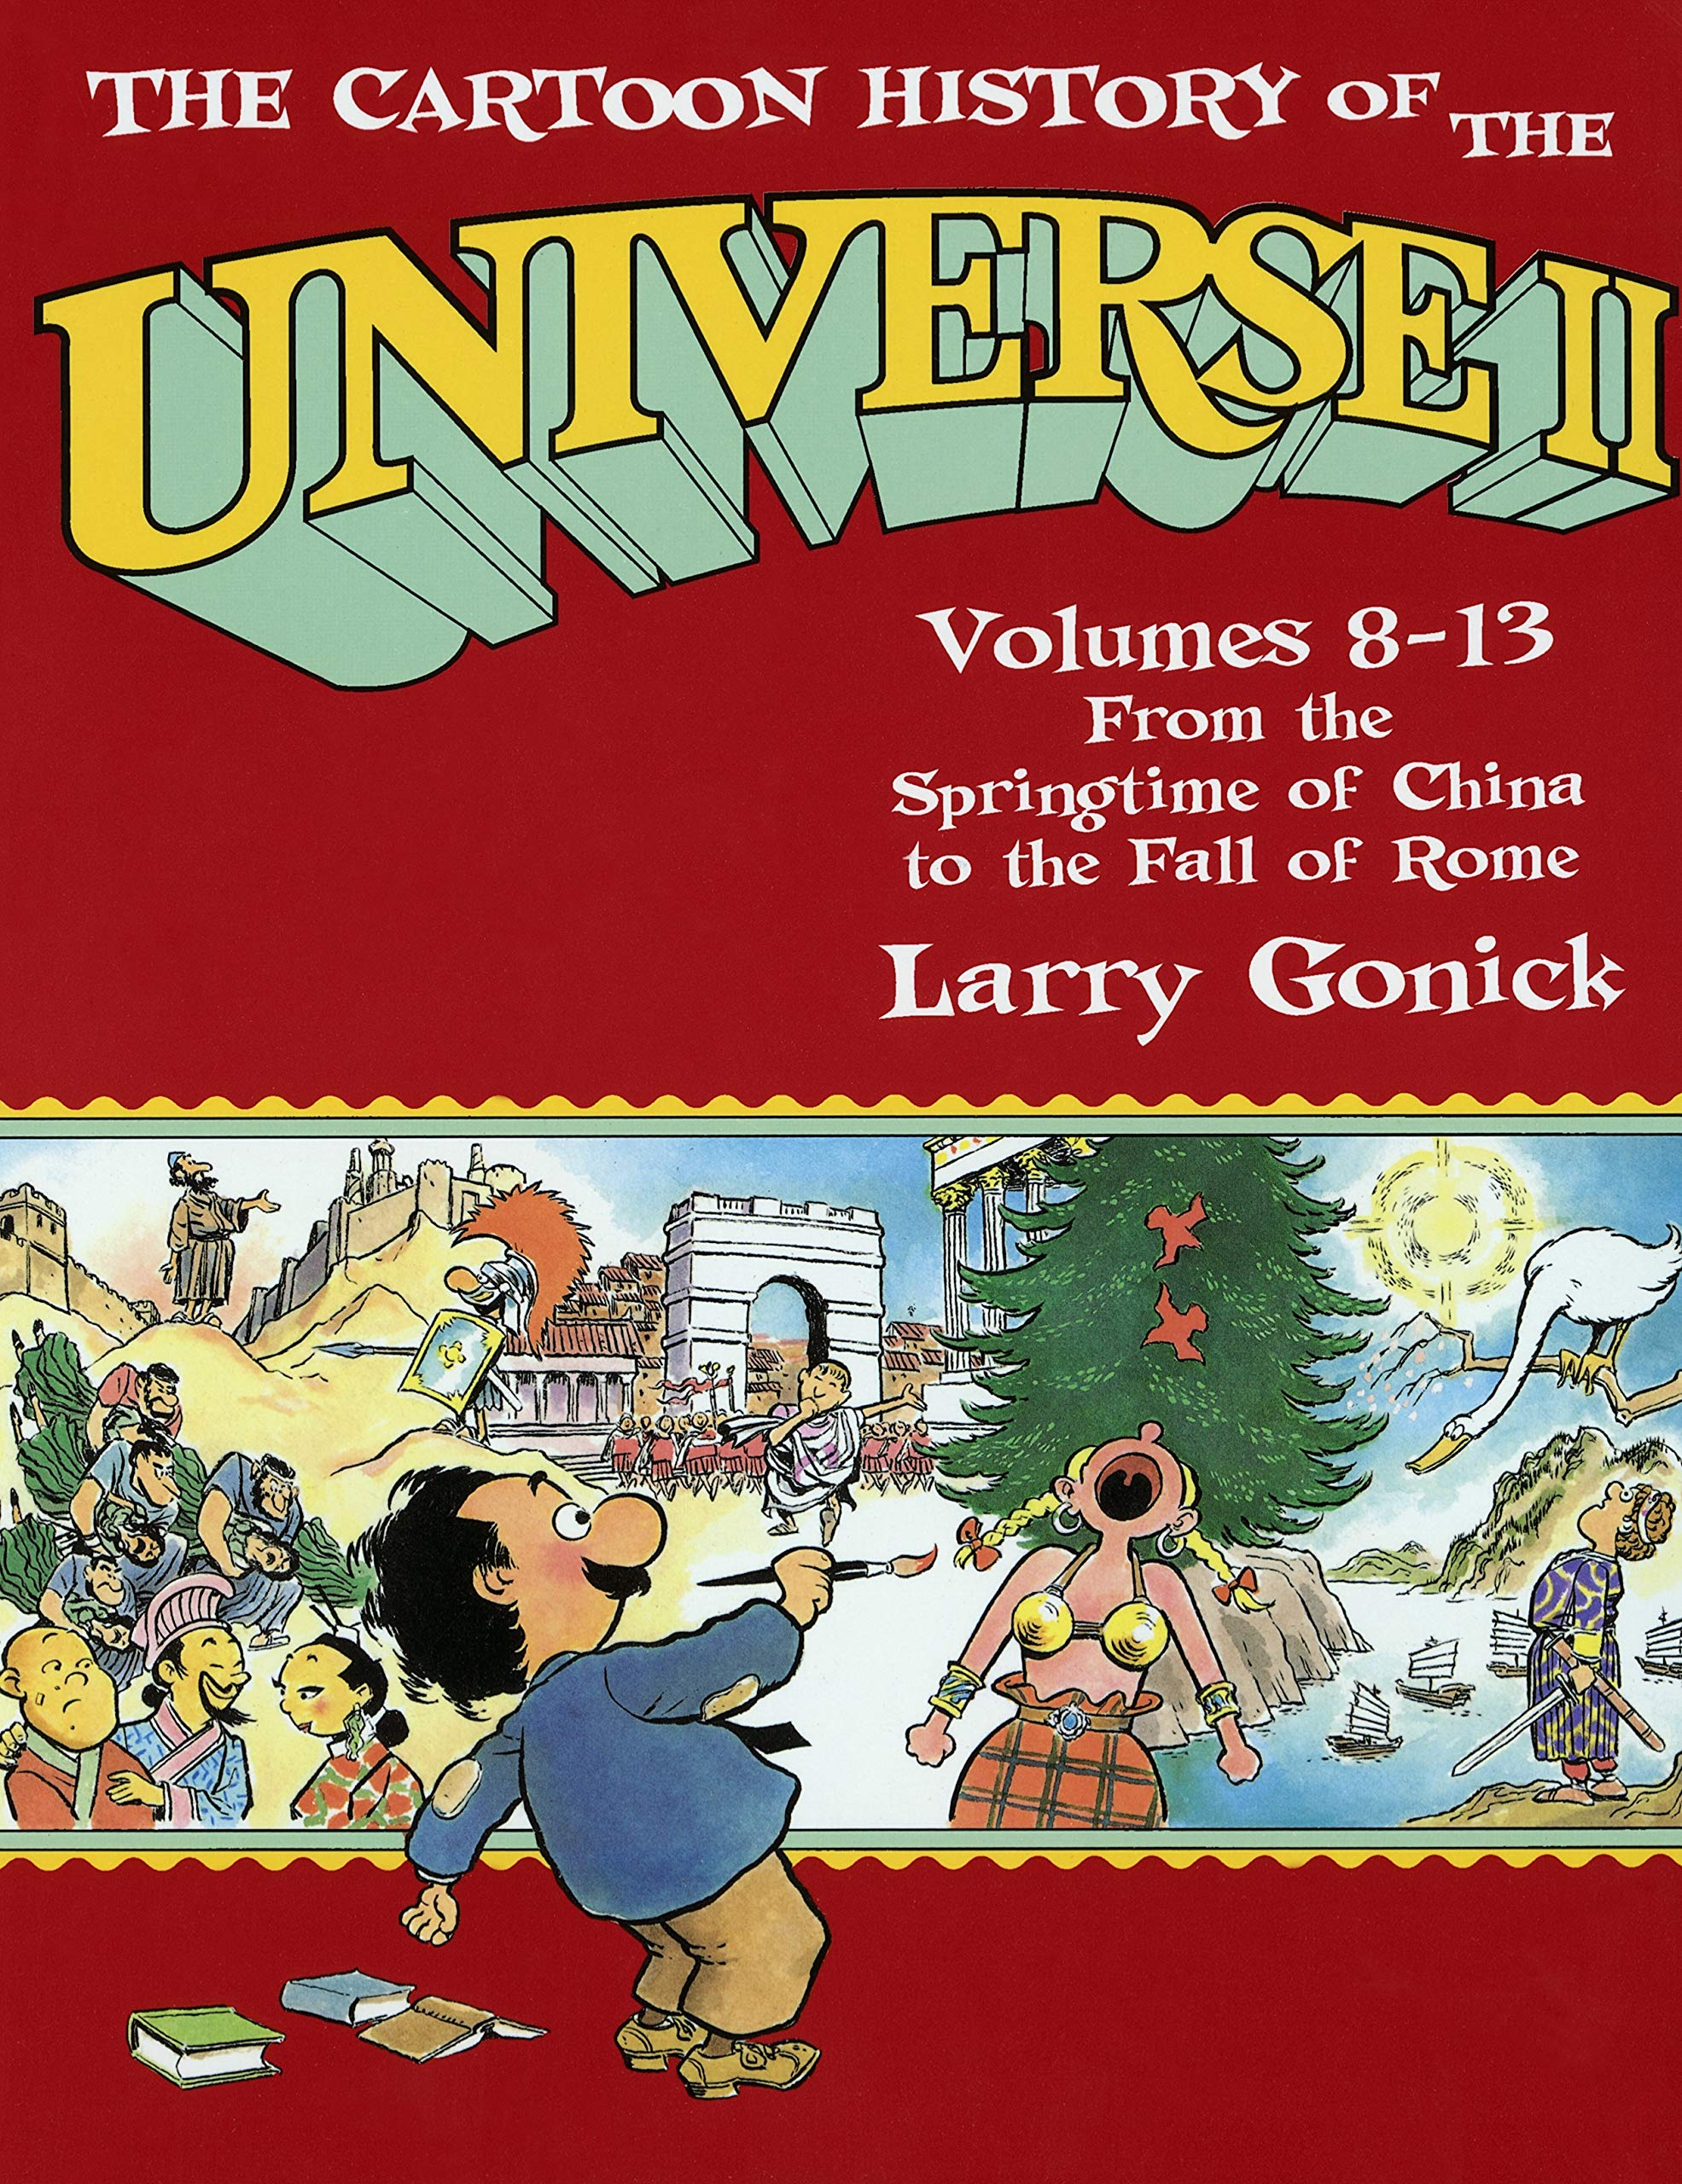 Cartoon History of the Universe II, Vol. 8-13: From the Springtime of China to the Fall of Rome